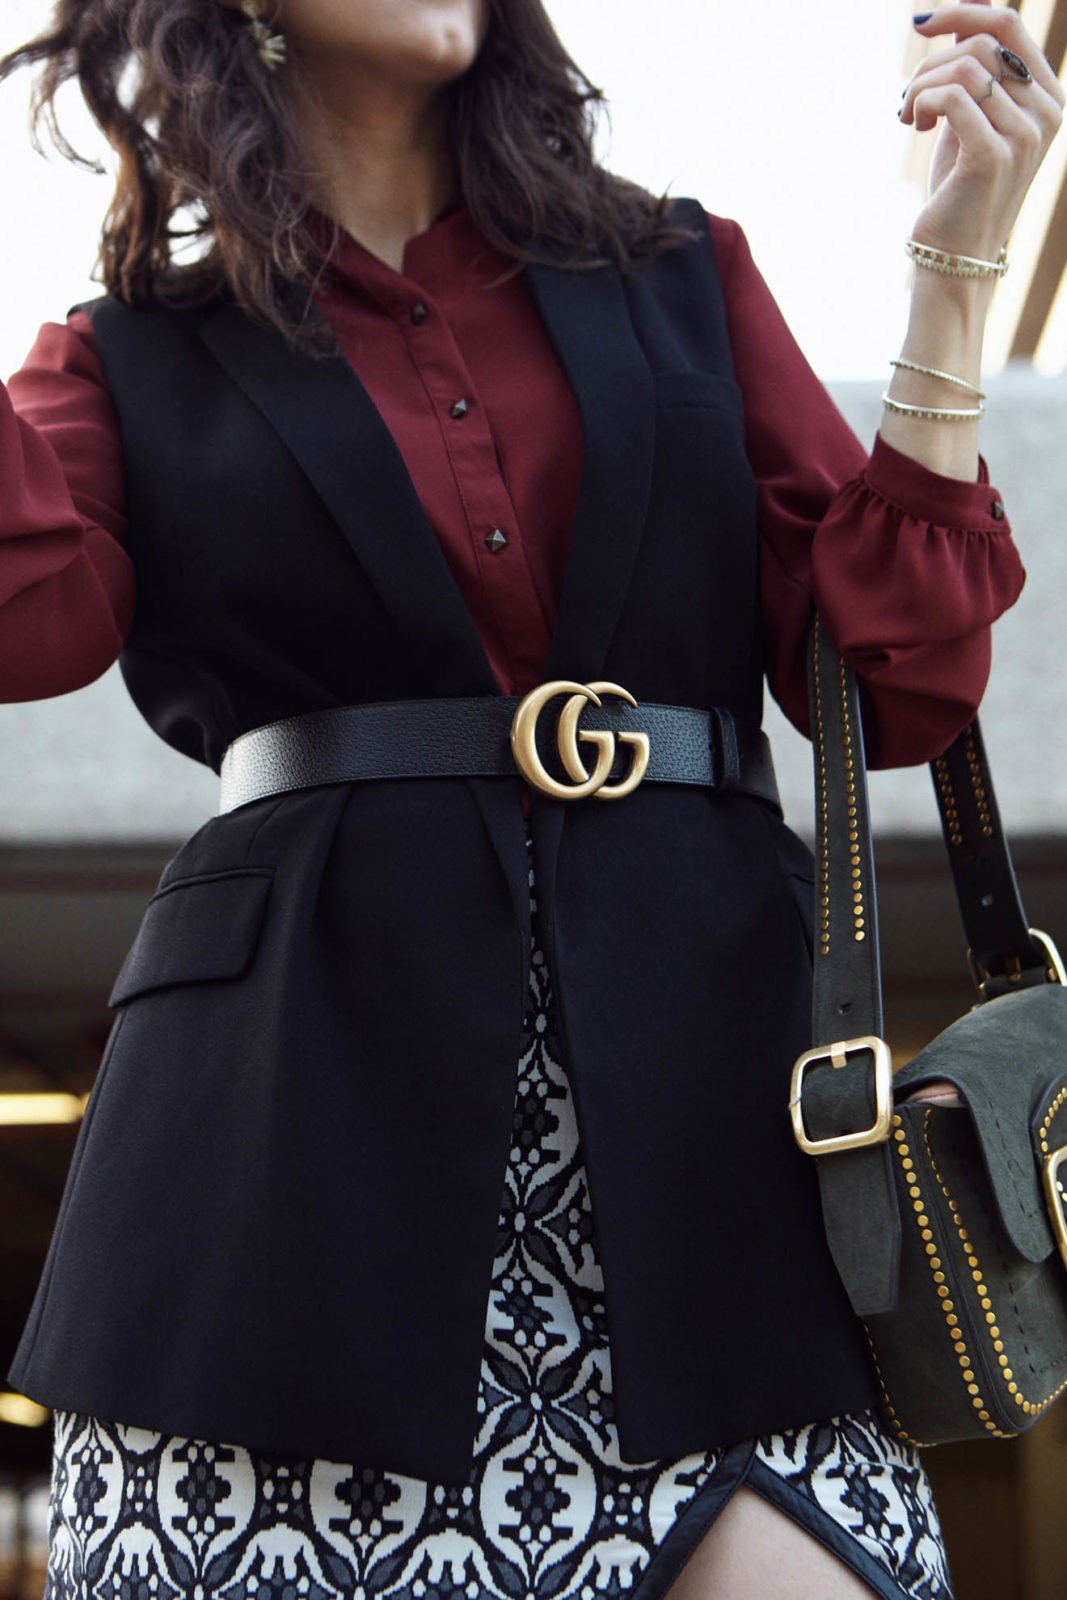 The Power of A Positive Mindset, Laura Lily - Fashion, Travel and Lifestyle Blog, Gucci Marmont Belt, Tory Burch Studded Suede Bag, Kendra Scott jewelry,